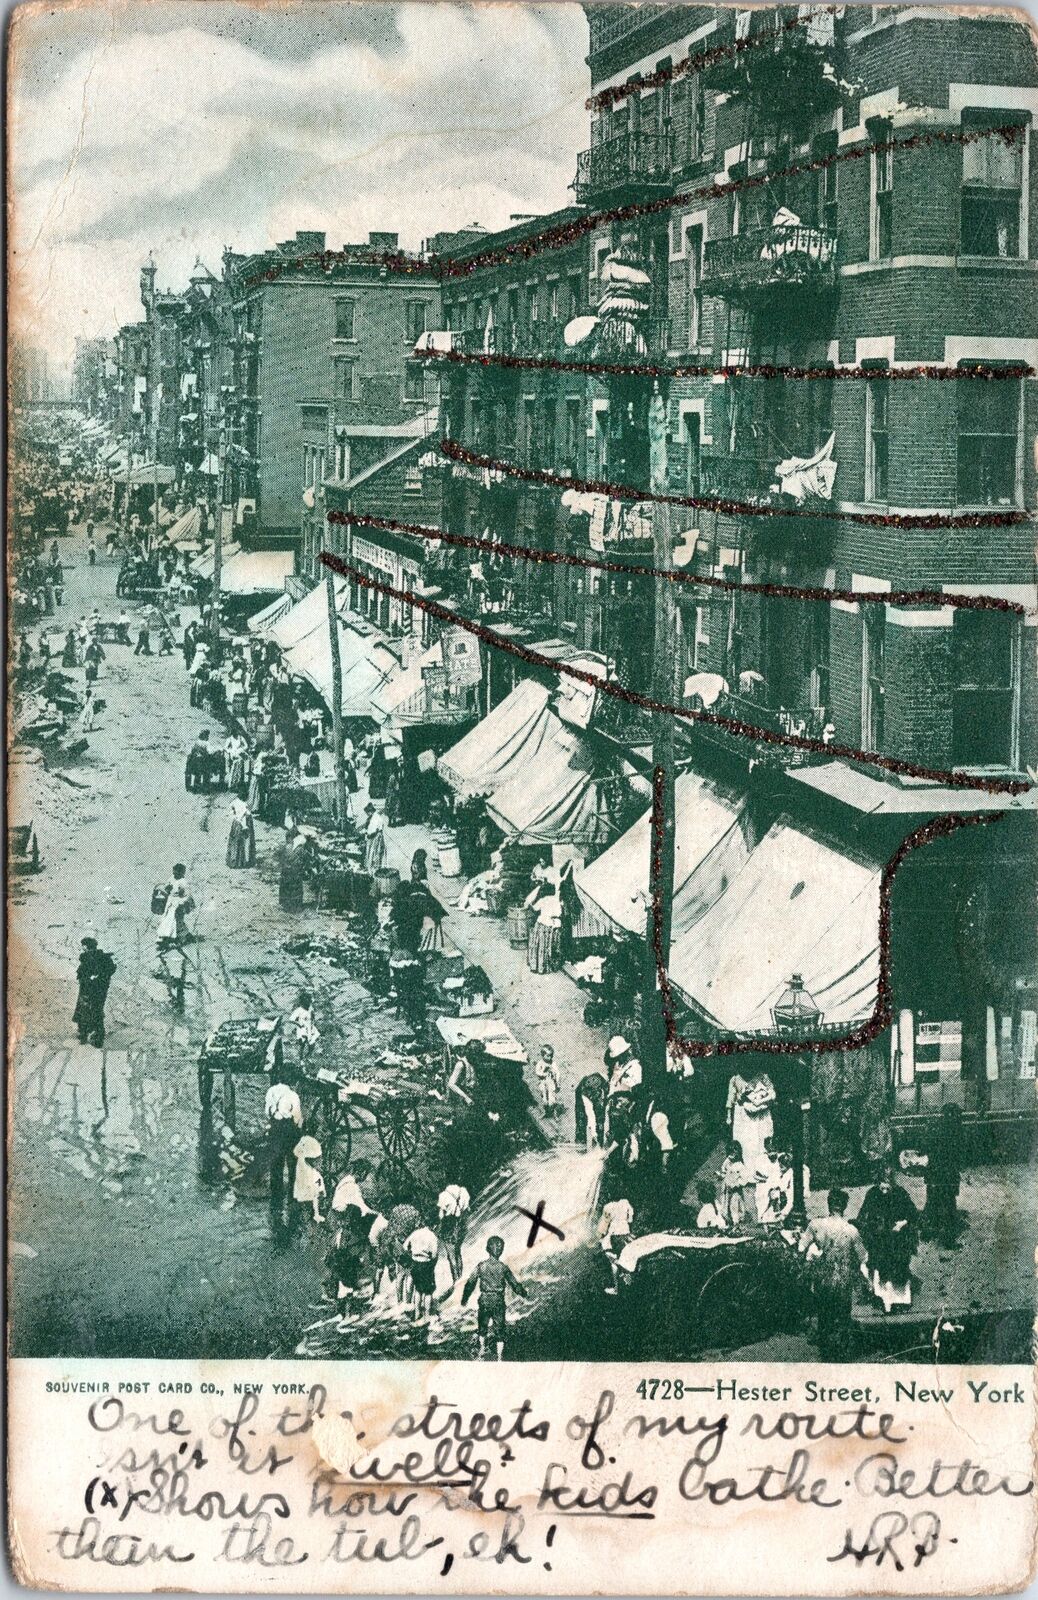 VINTAGE POSTCARD GLITTERED HESTER STREET CROWDED SCENE NEW YORK CITY POSTED 1905